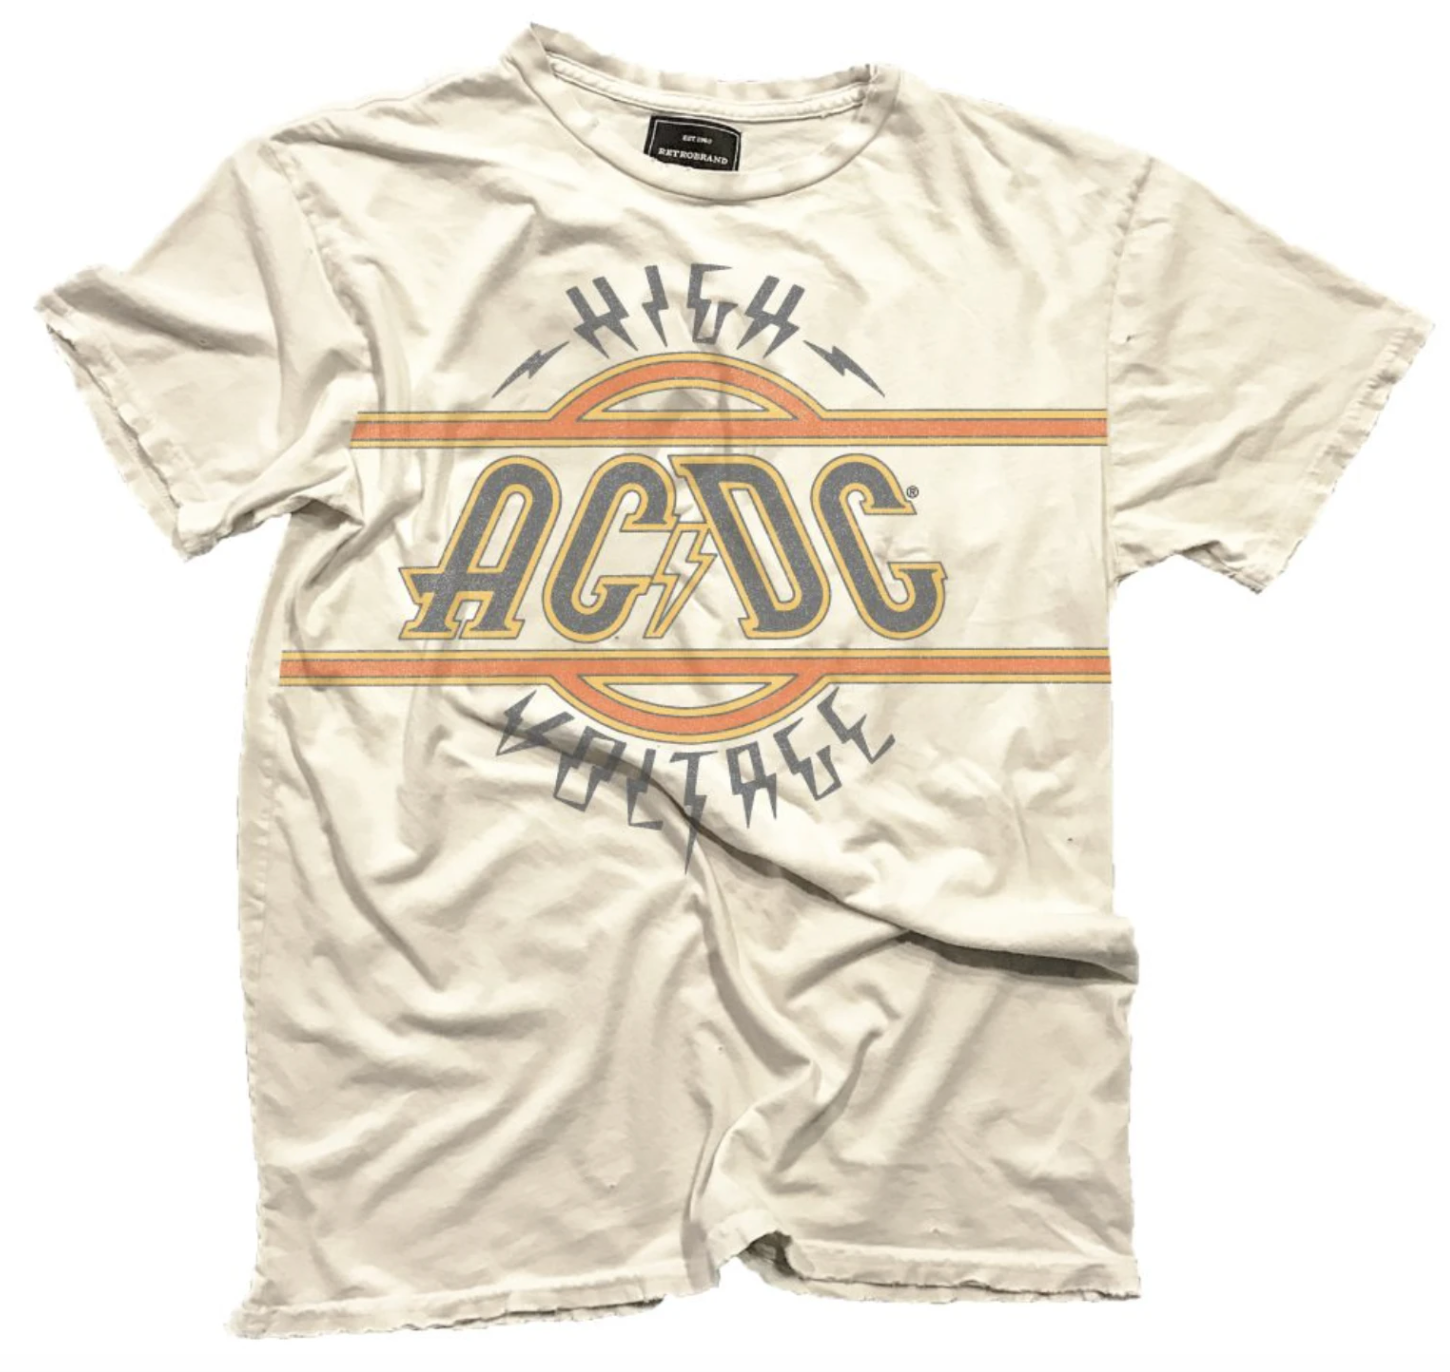 AC/DC High Voltage logo on our Black Label 100% cotton tee in antique white